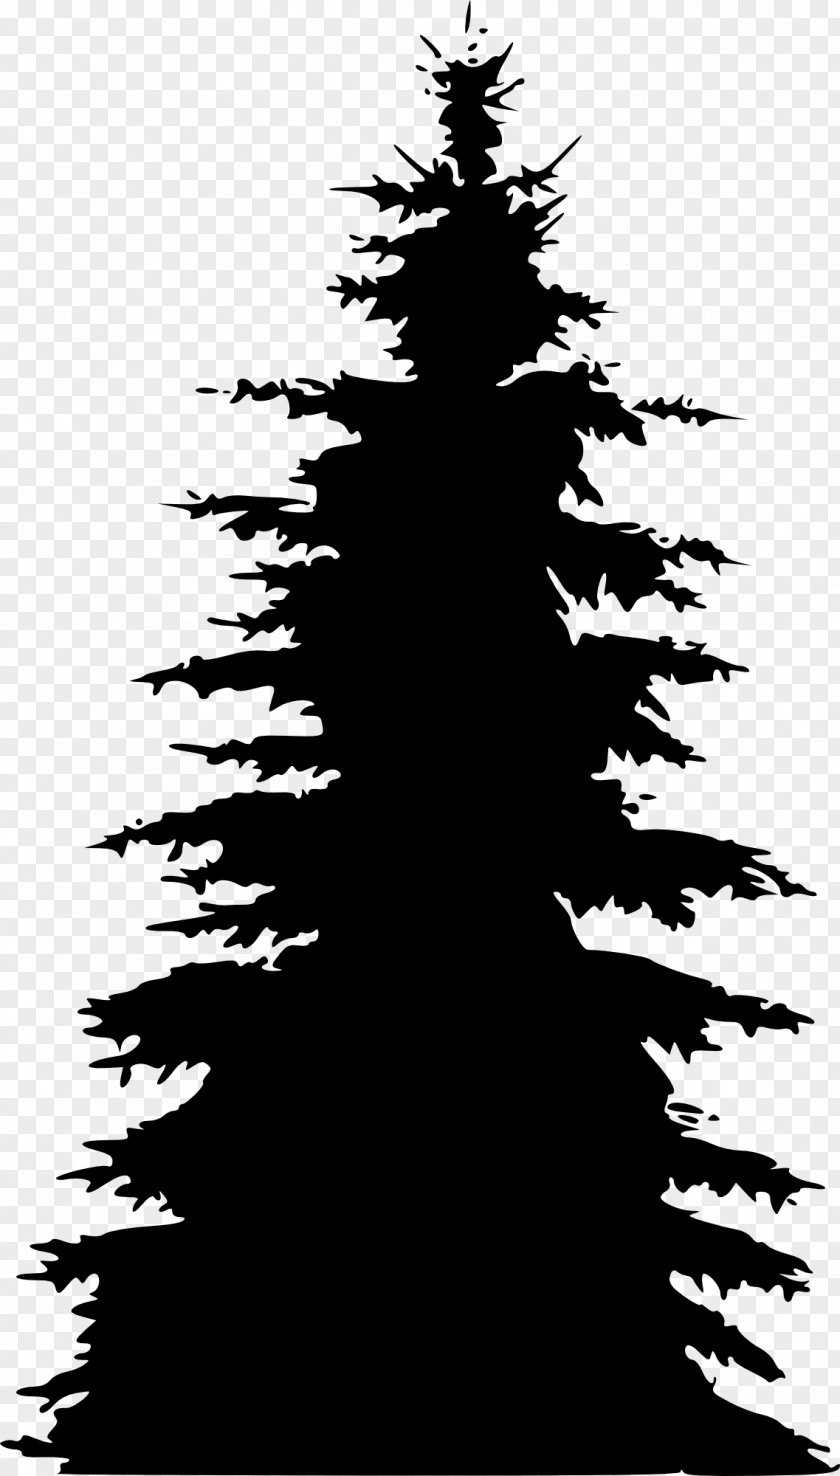 Pine Tree Fir Spruce Silhouette PNG